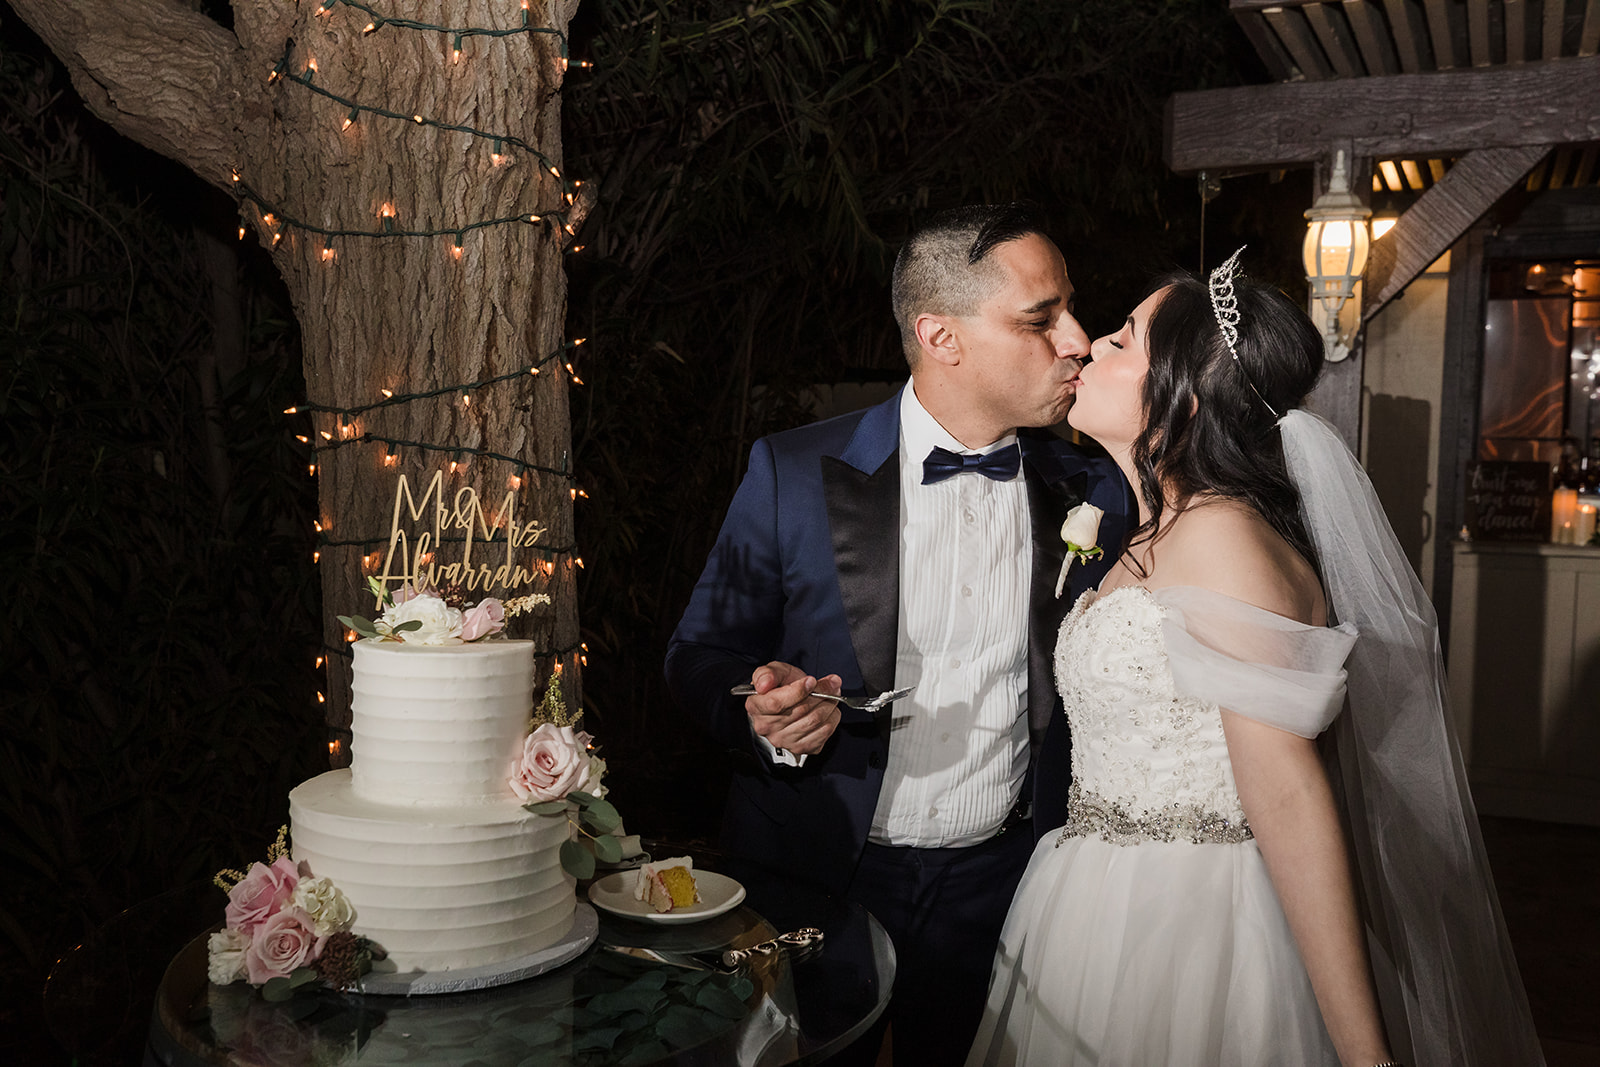 Newlyweds kiss after cutting the cake